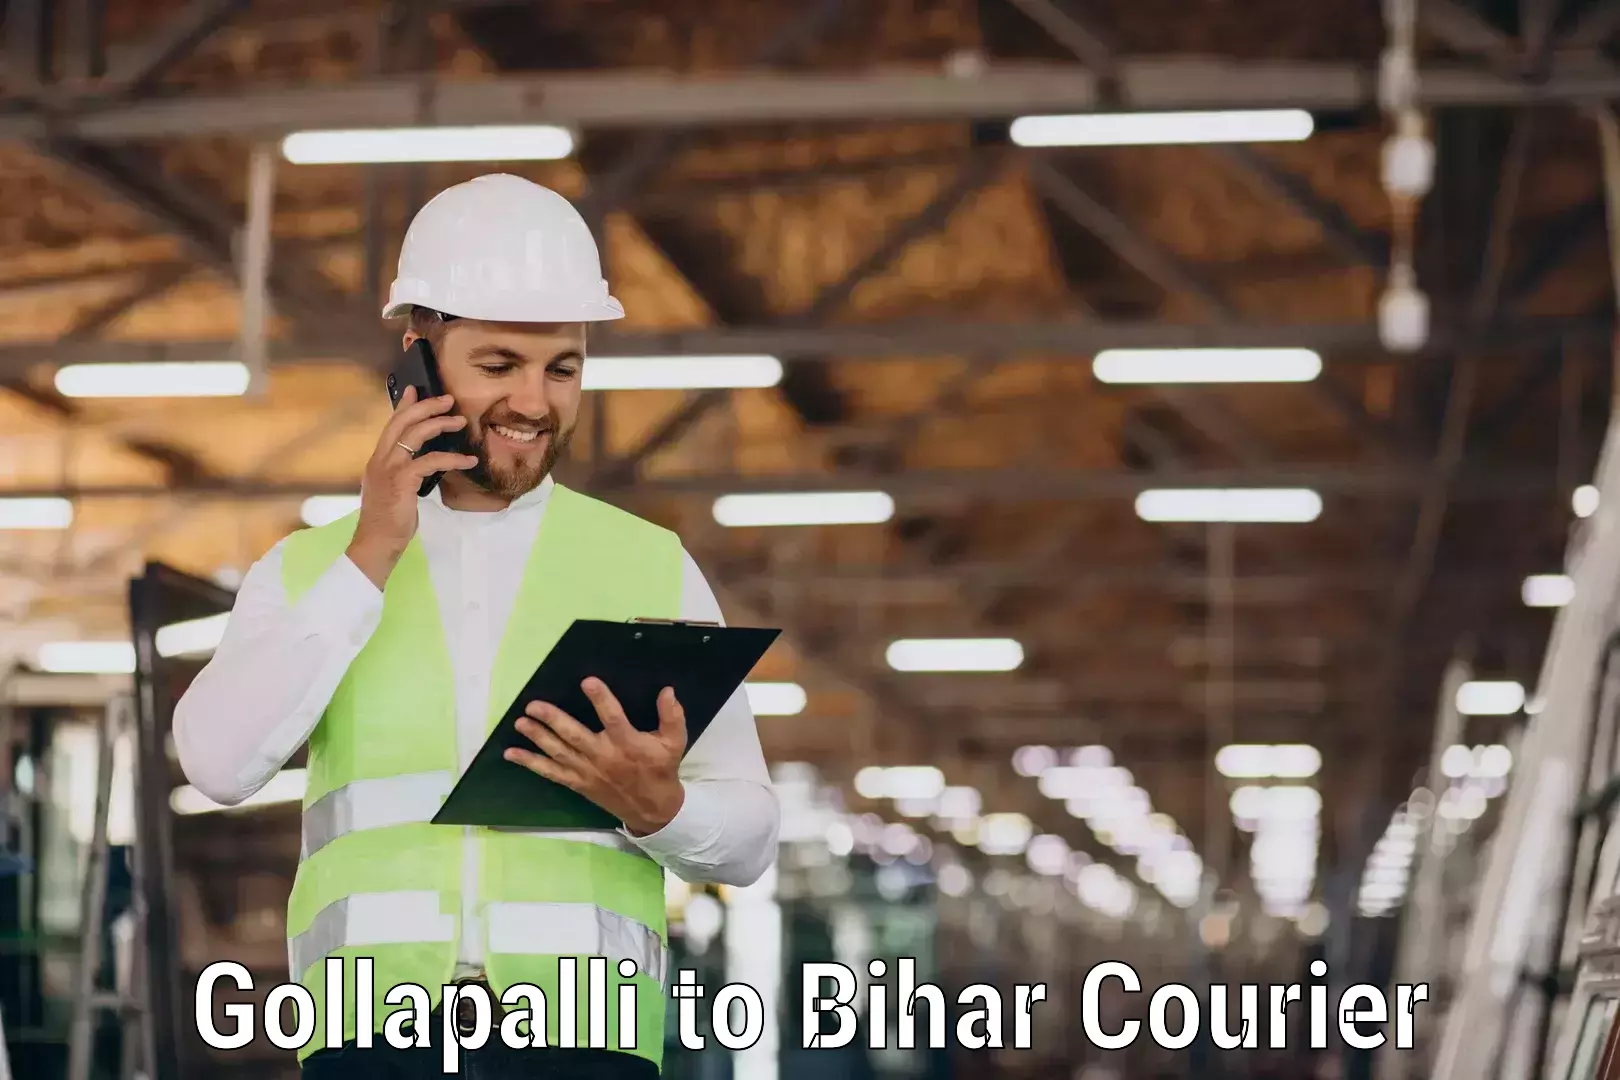 Express delivery solutions Gollapalli to Birpur